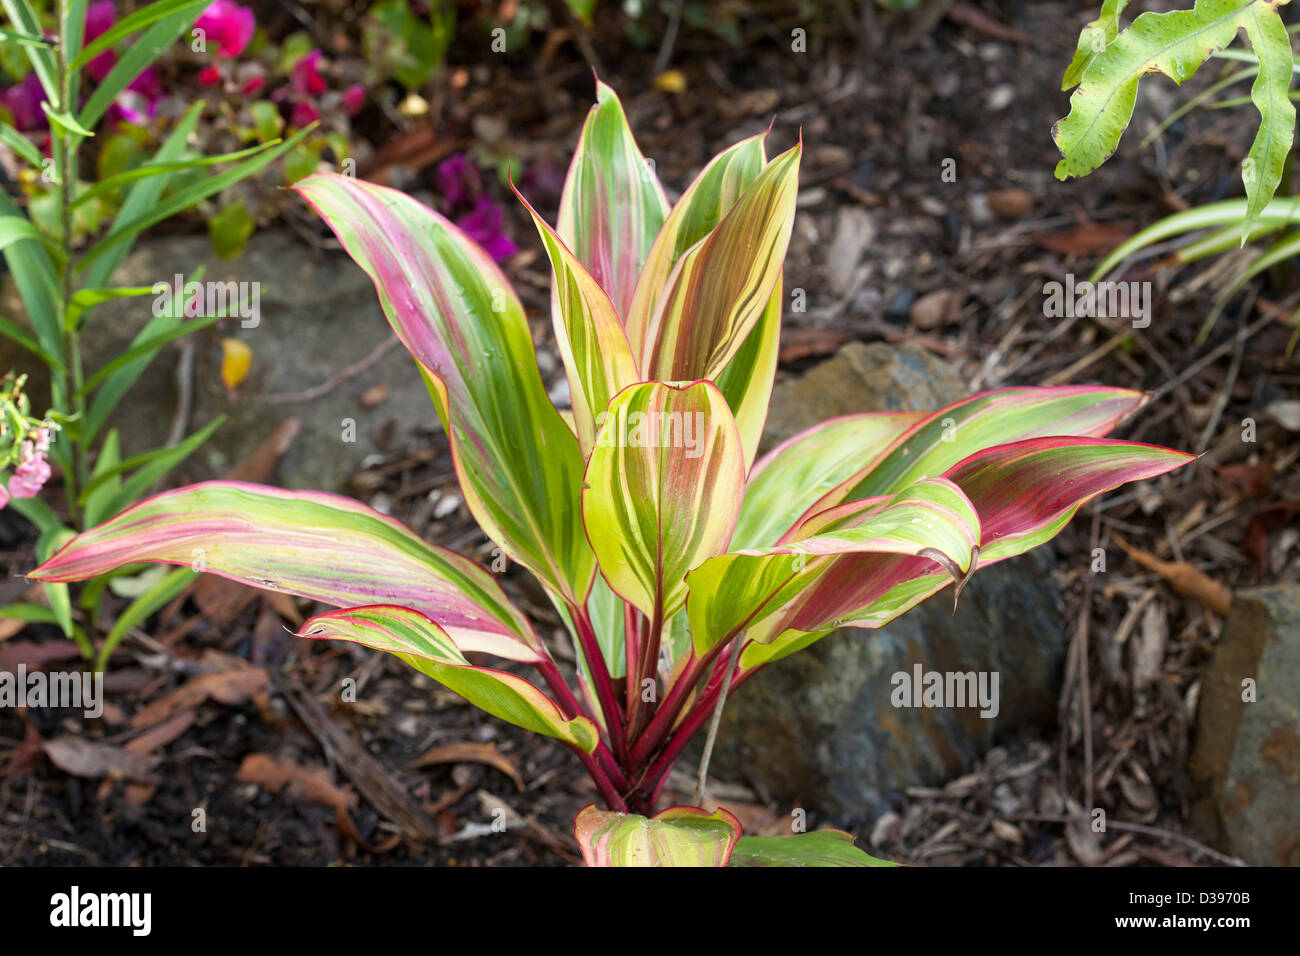 Cordyline fruticosa cultivar 'Rosa' - foliage plant with brightly variegated yellow, green and red leaves Stock Photo